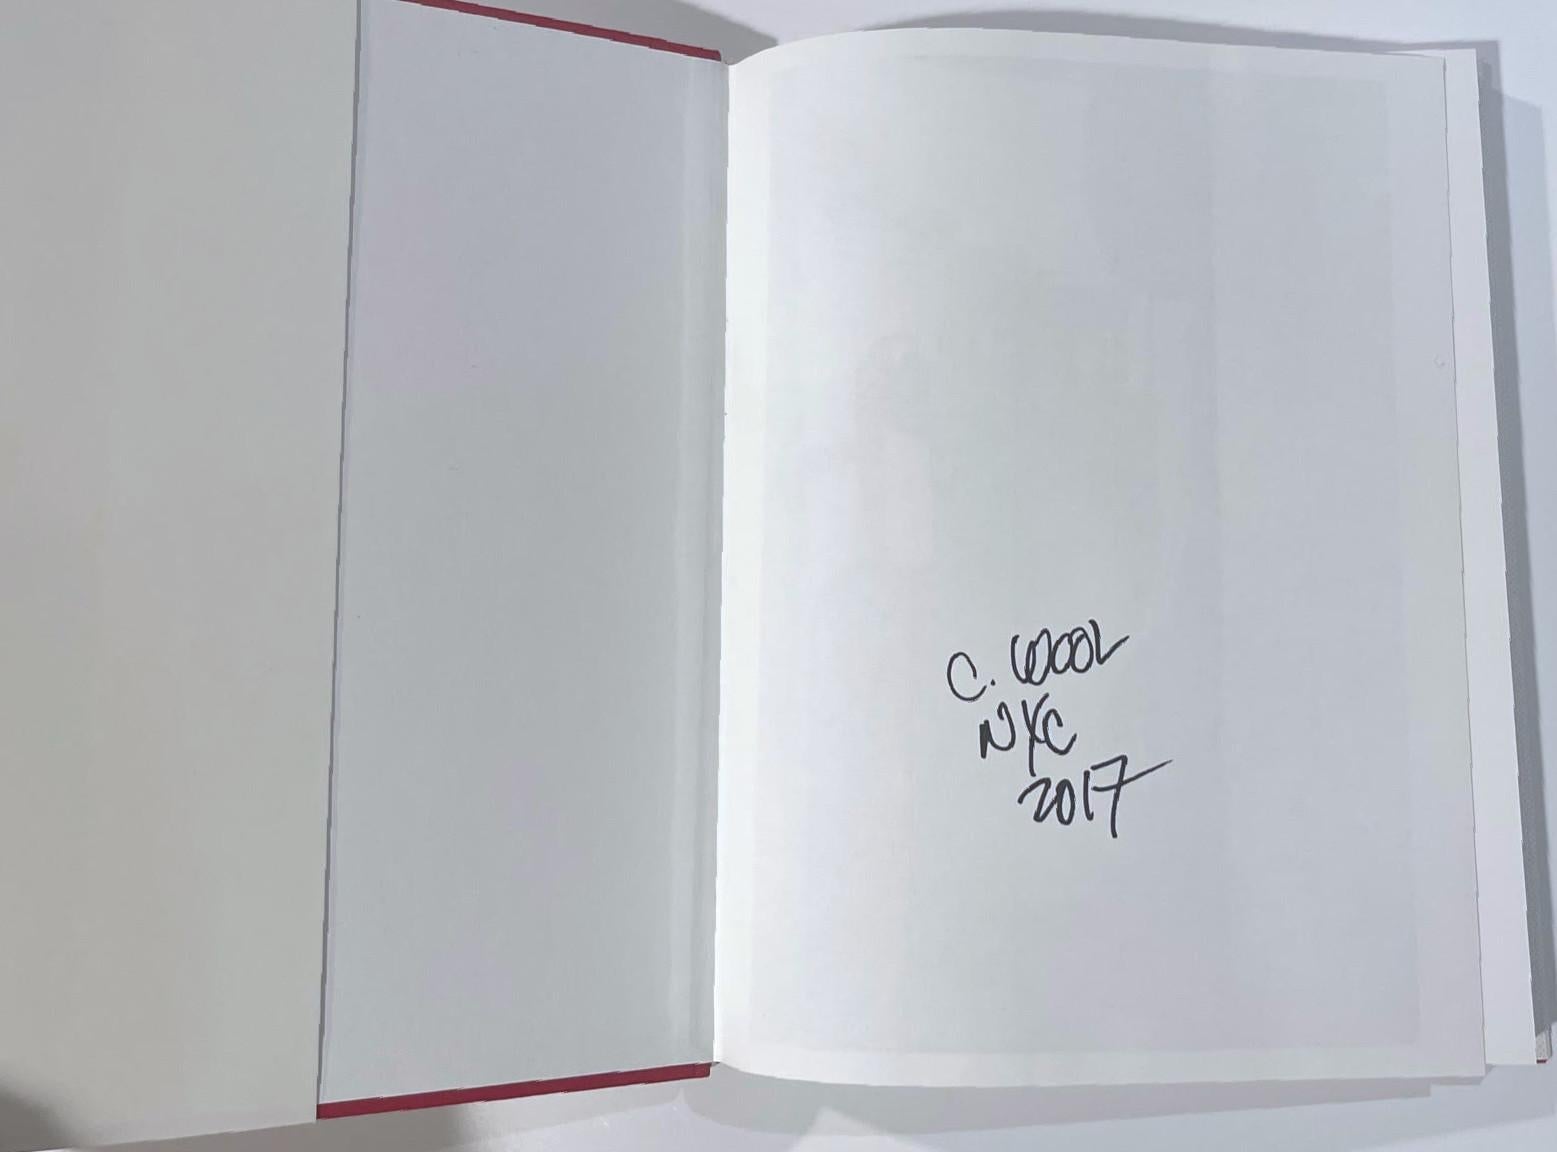 Christopher Wool Guggenheim Monograph, Hand signed and dated by Christopher Wool For Sale 2